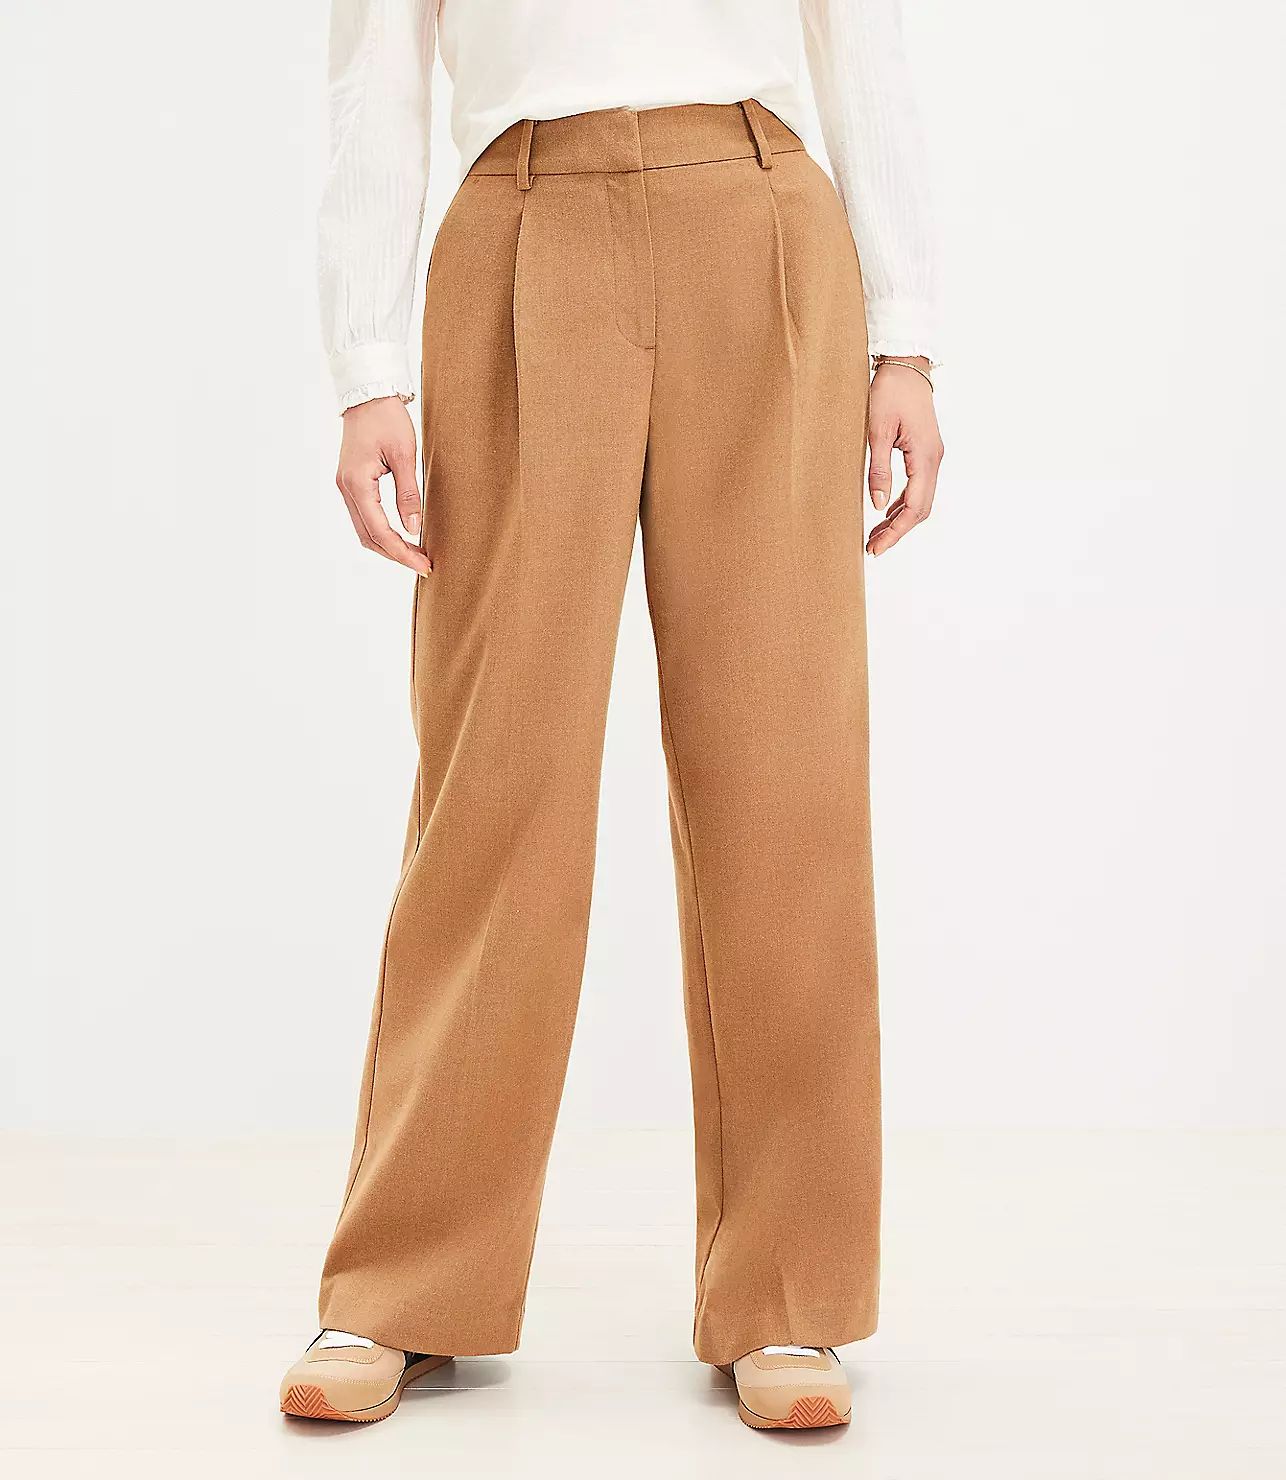 Curvy Peyton Trouser Pants in Heathered Brushed Flannel | LOFT